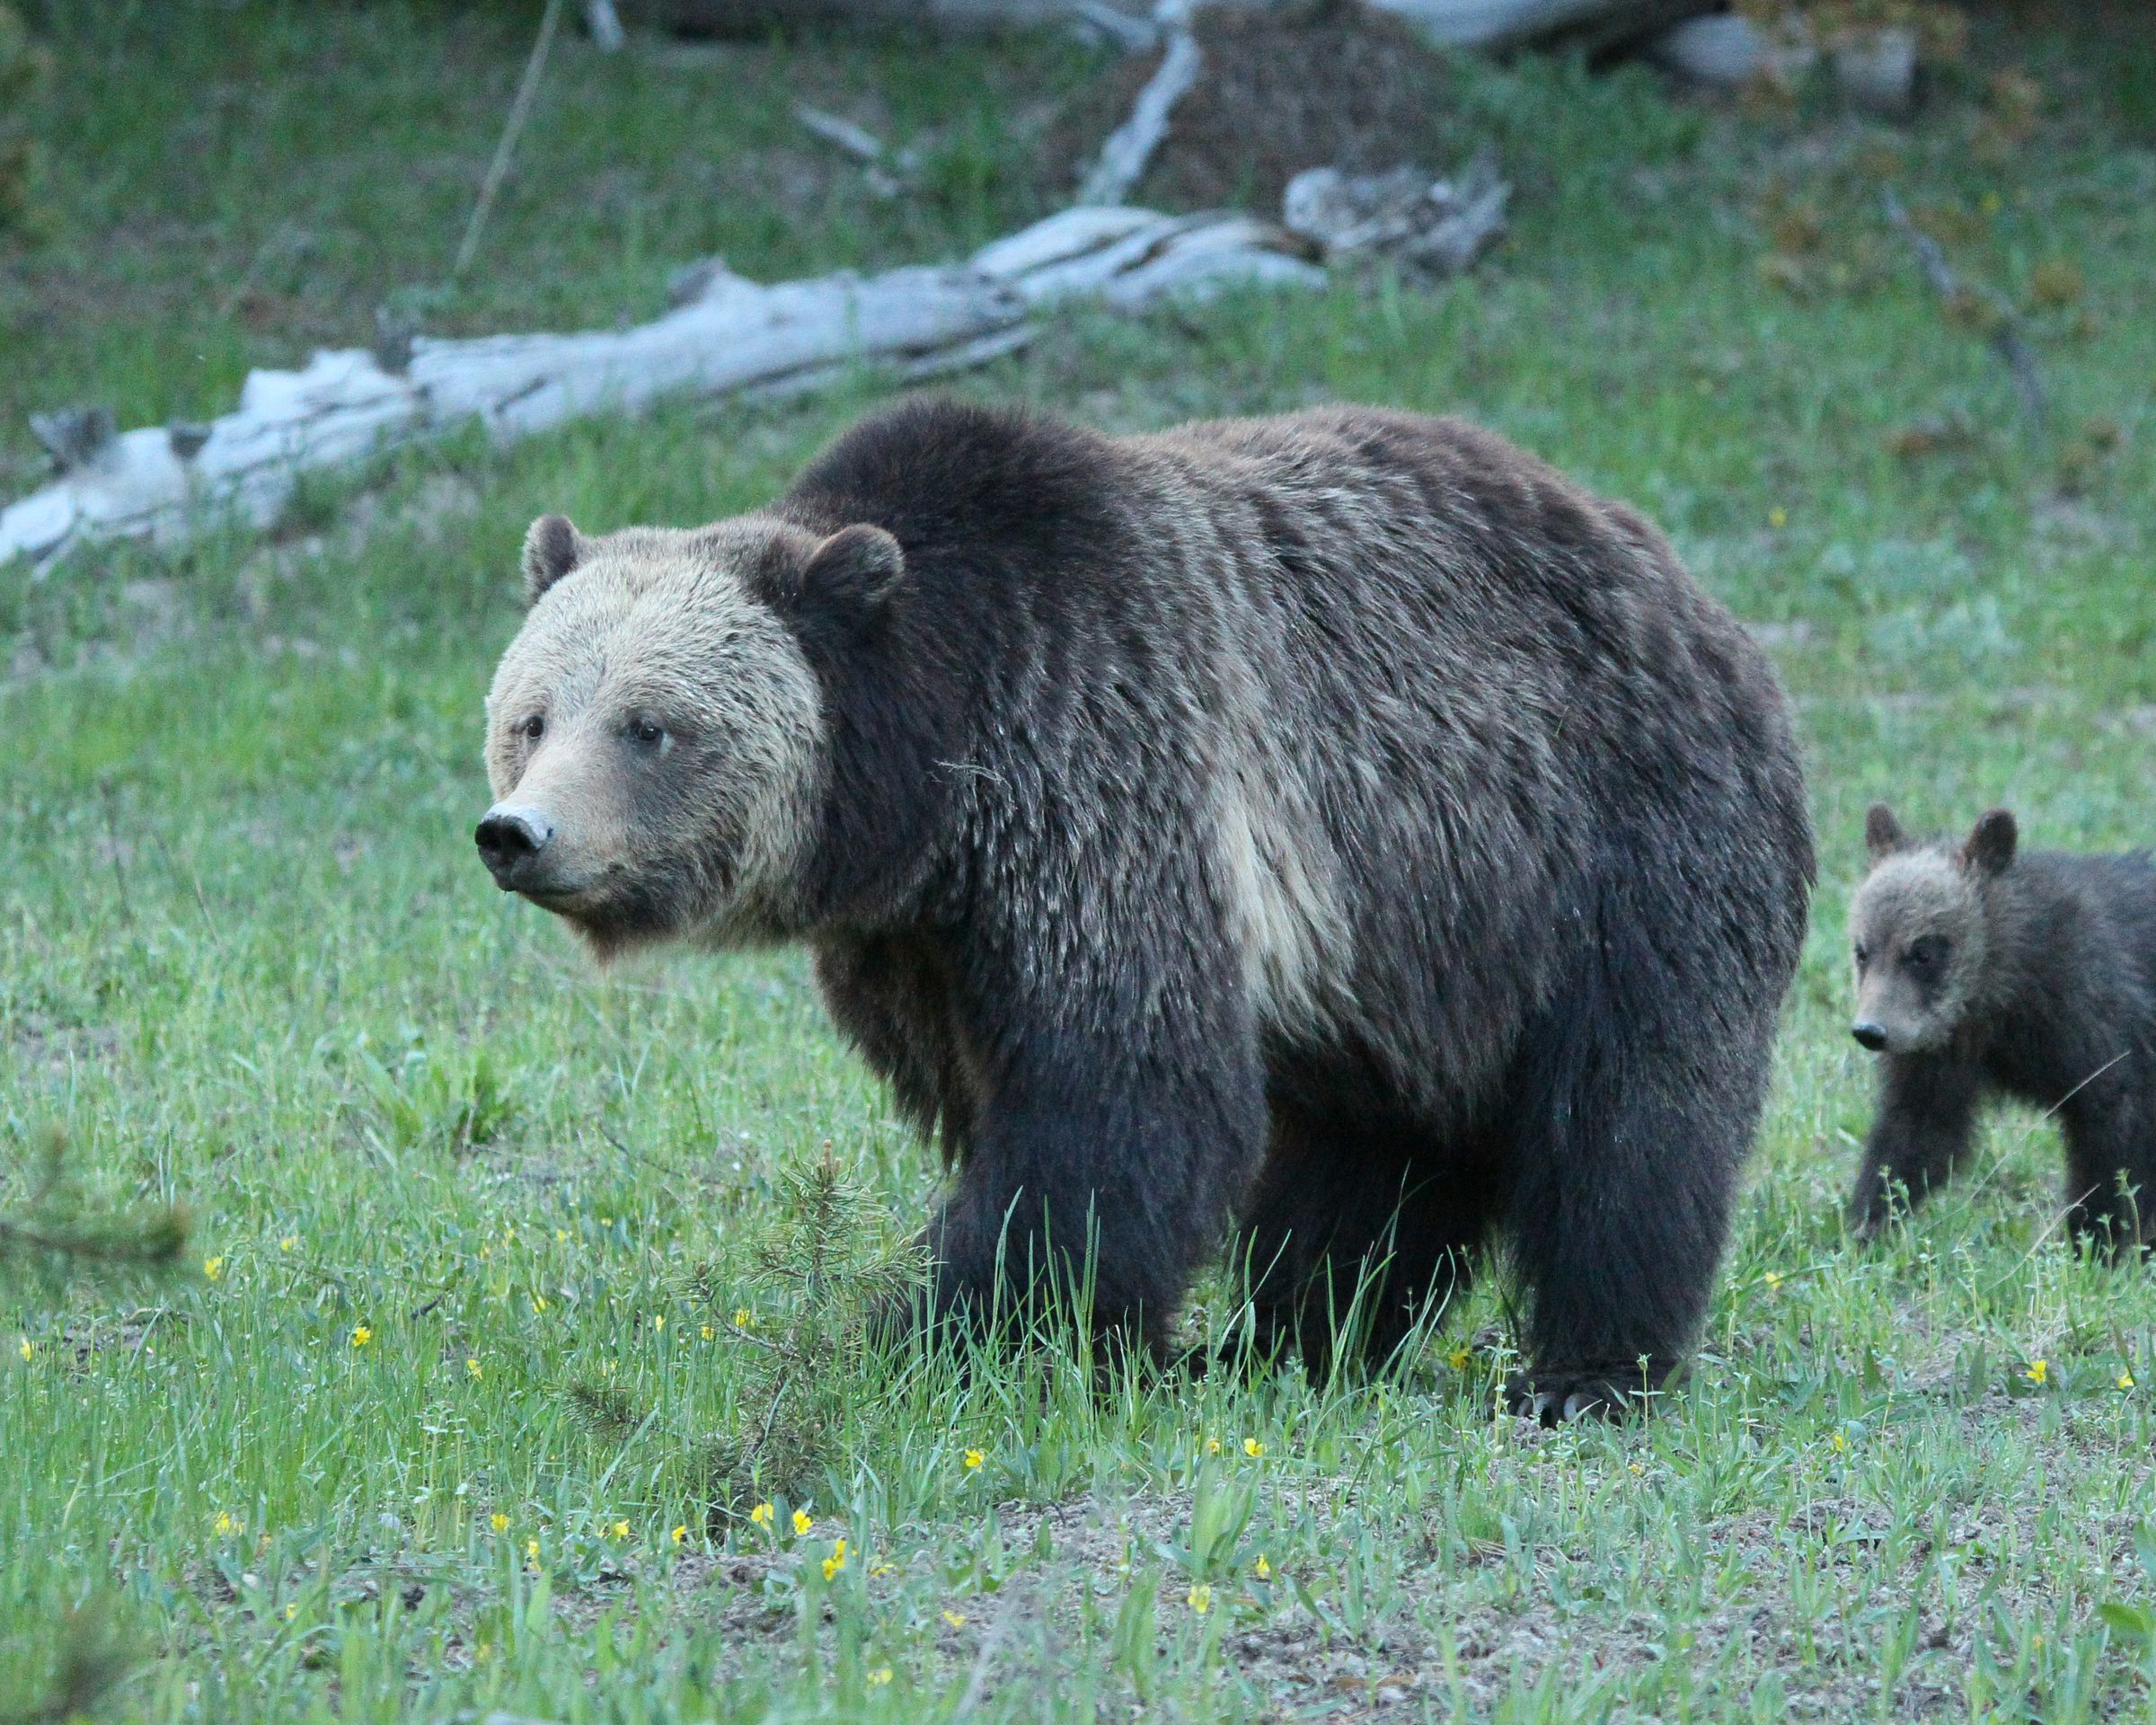 A large grizzly bear and a cub standing side by side on grass